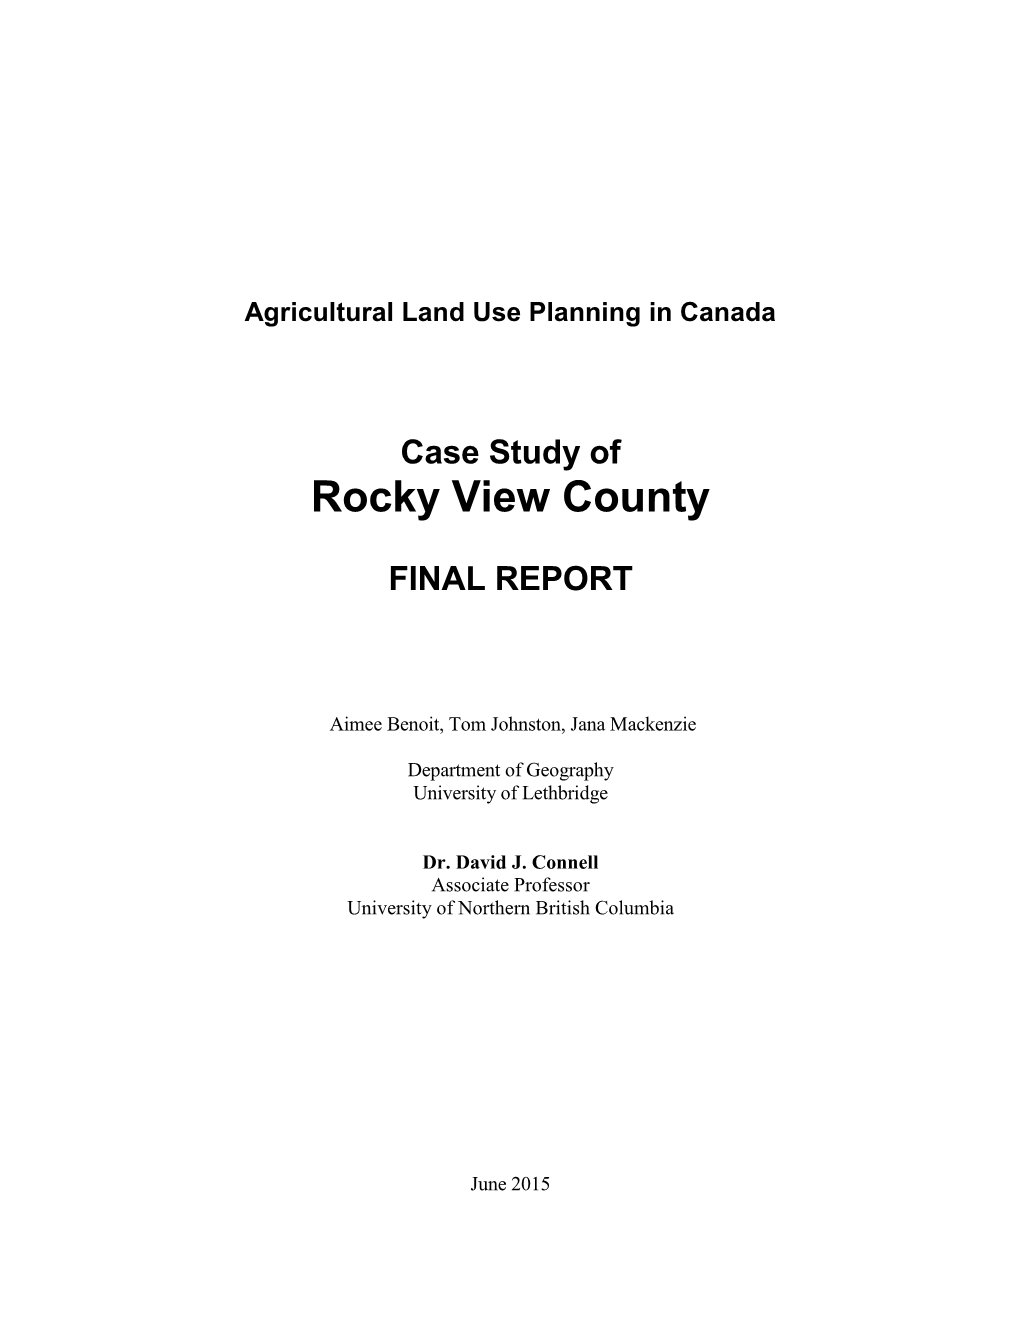 Case Study of Rocky View County